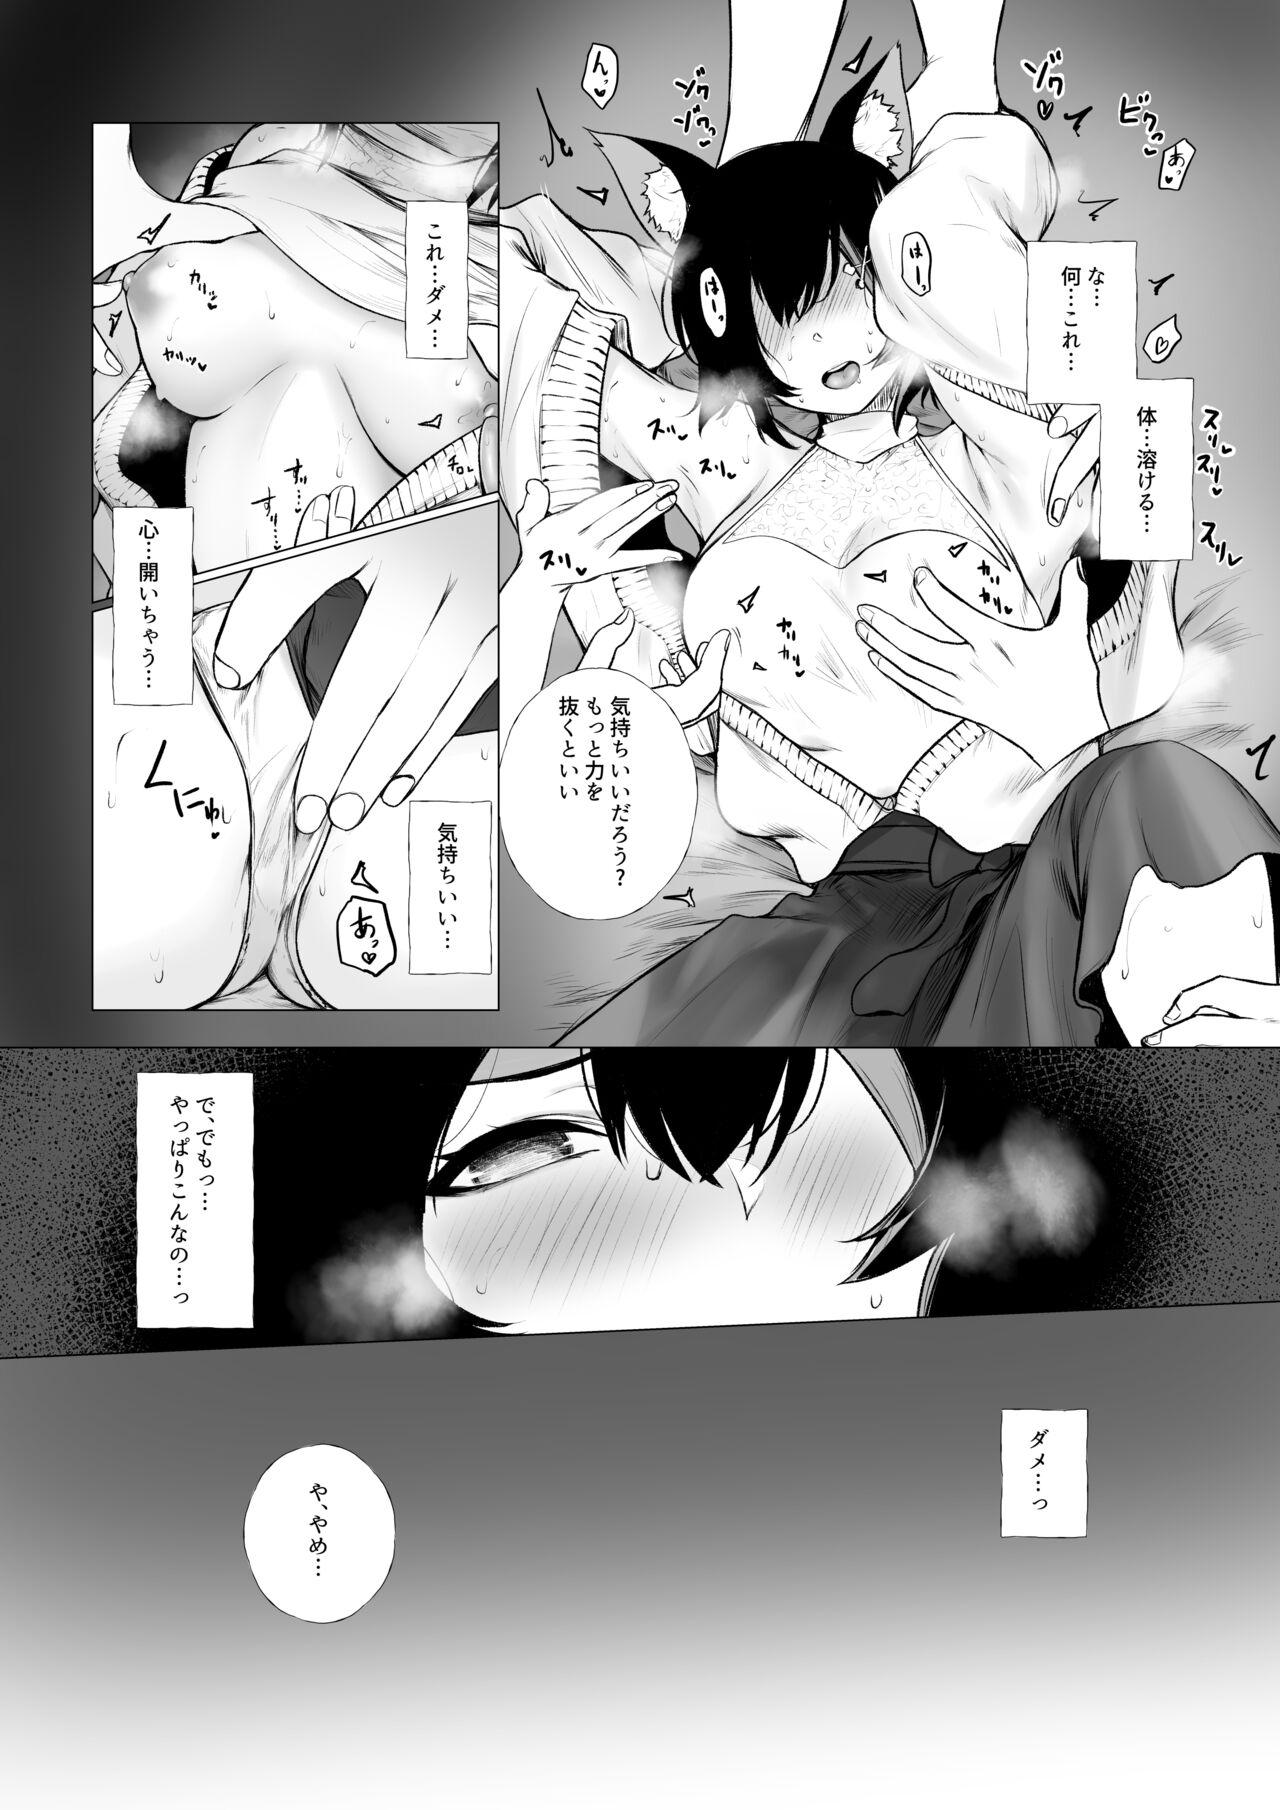 Peludo 女にされちゃうmo - Hololive Longhair - Page 3